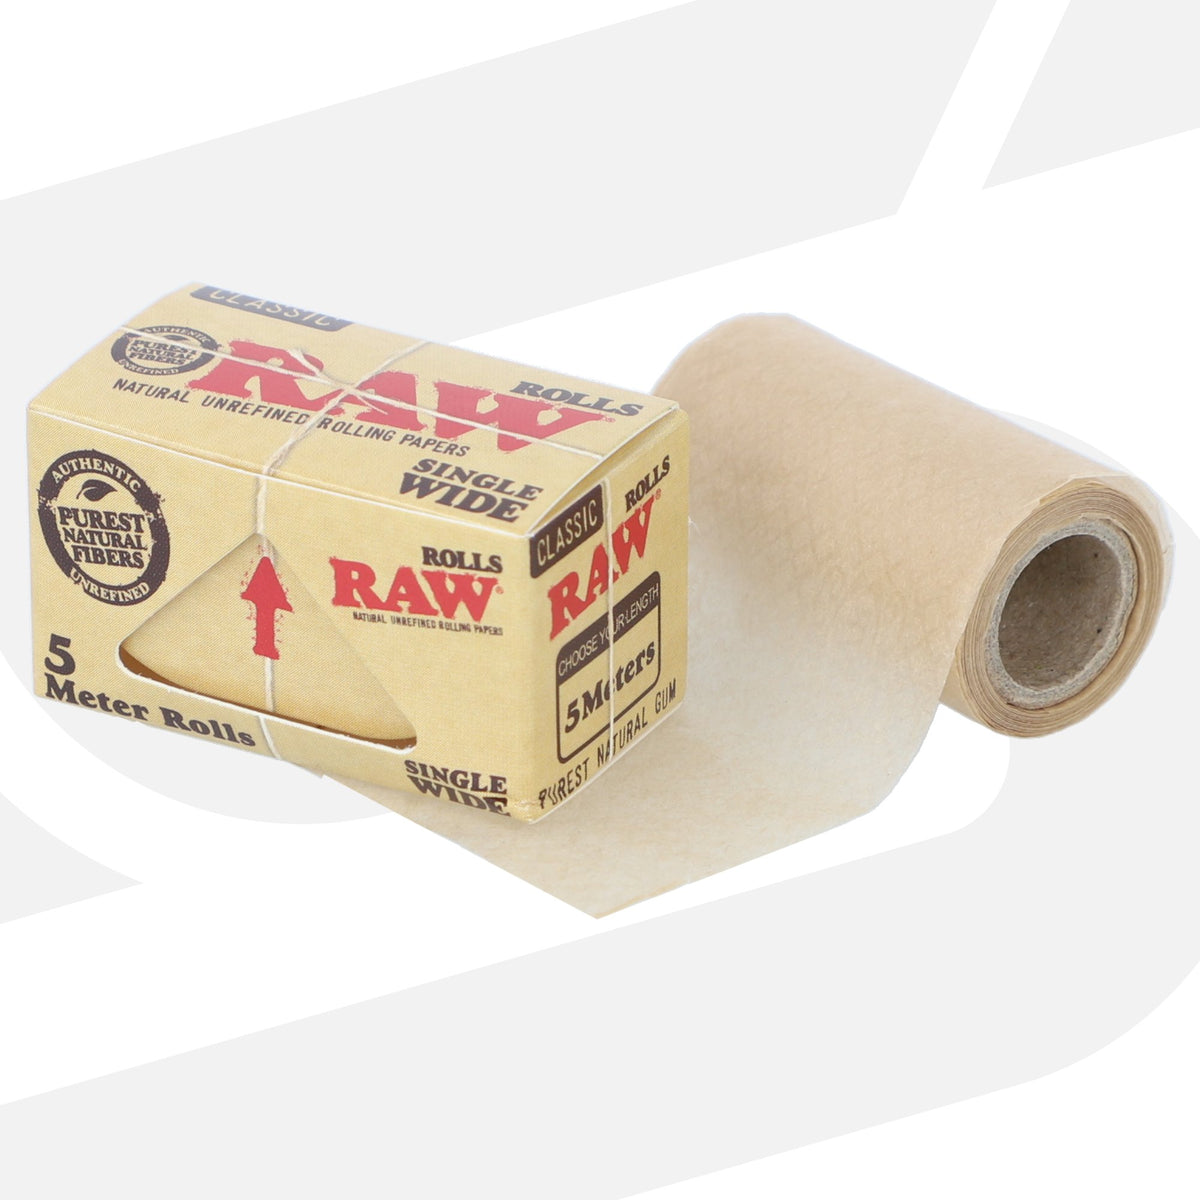 RAW Classic Paper Rolls Single Wide - 5 Meters Rolling Papers esd-official